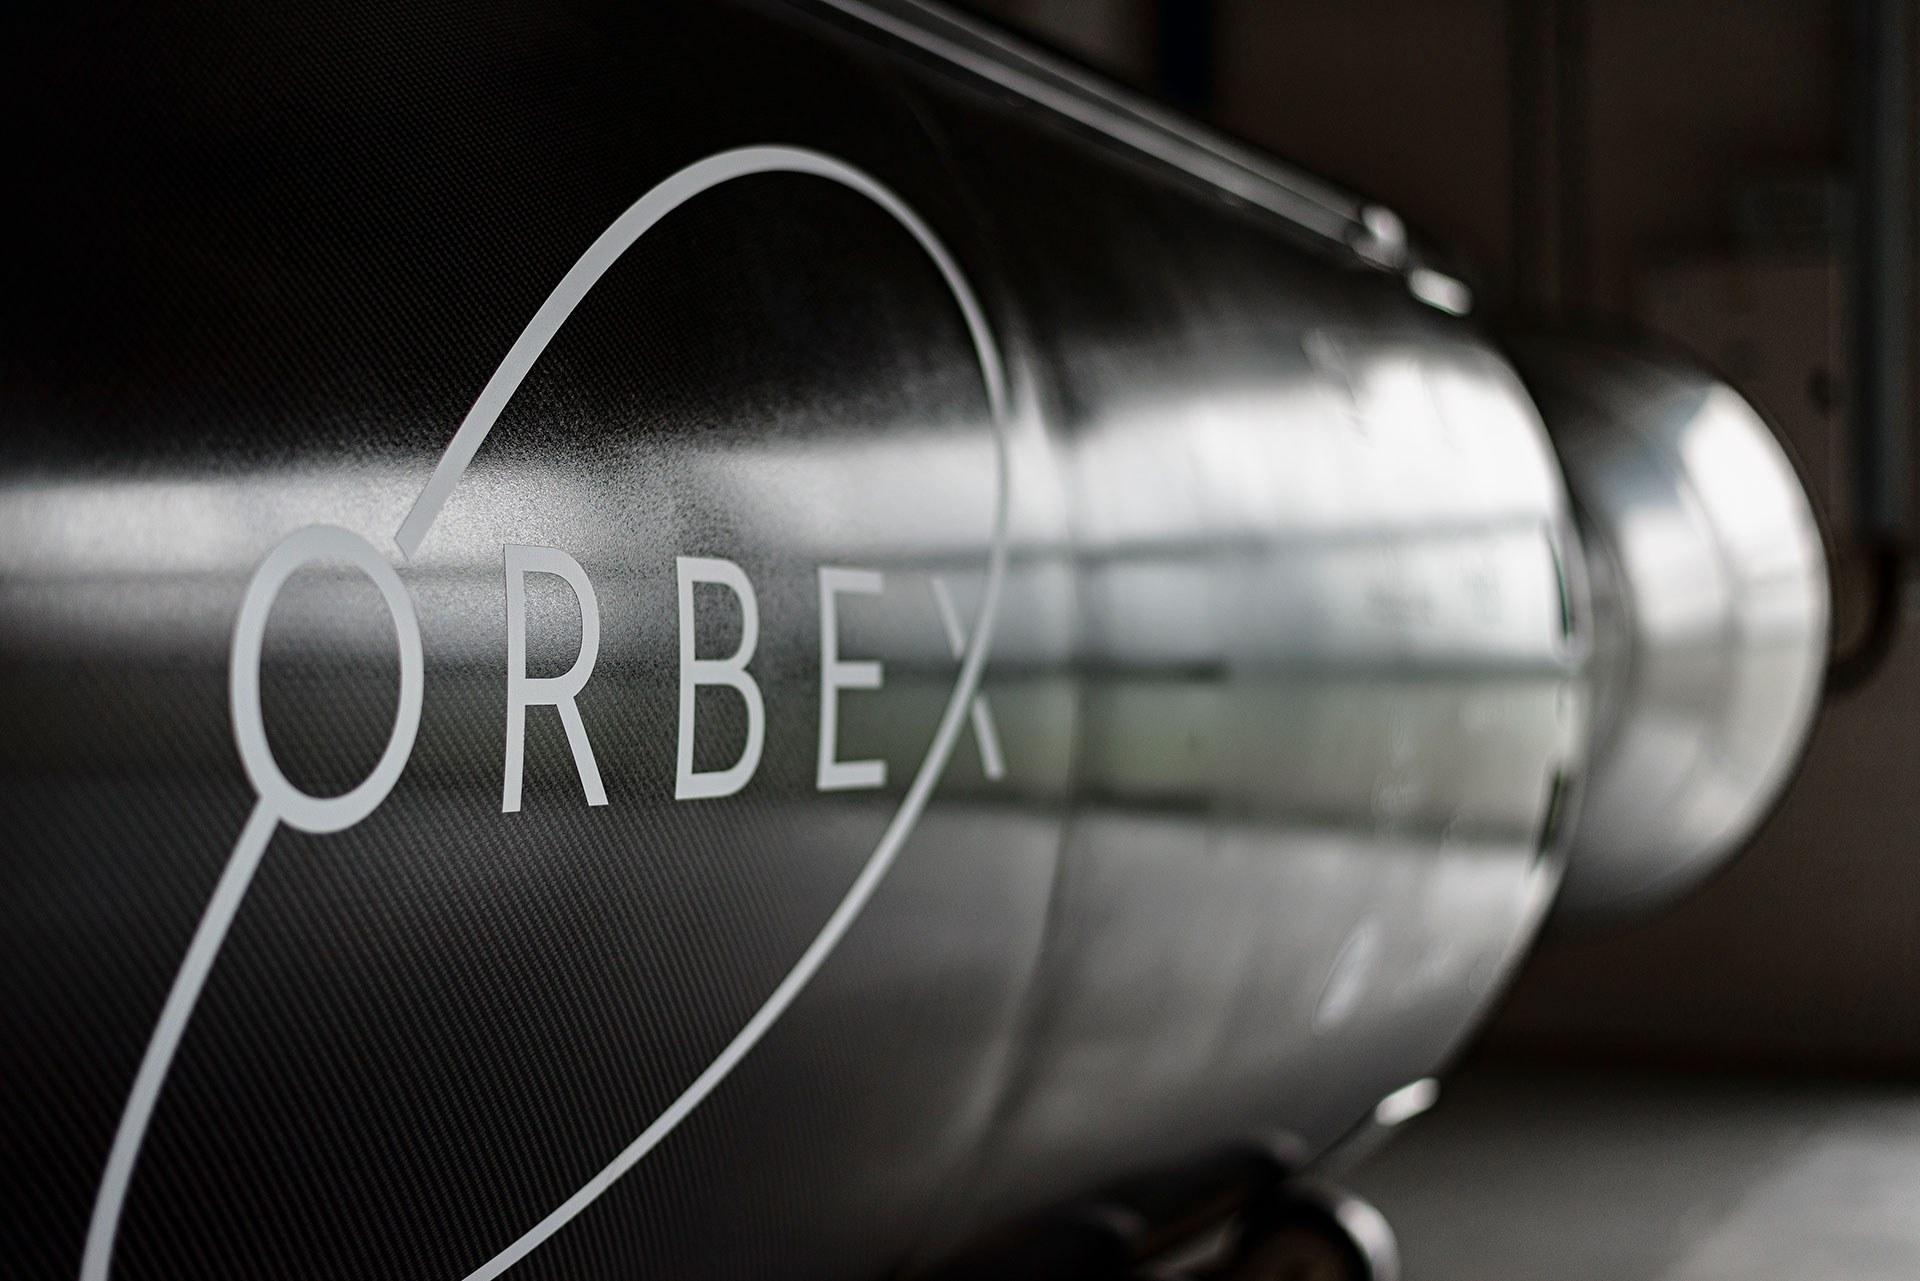 Orbex Space & UK Aerospace Companies Voice Their Post-Brexit Concerns